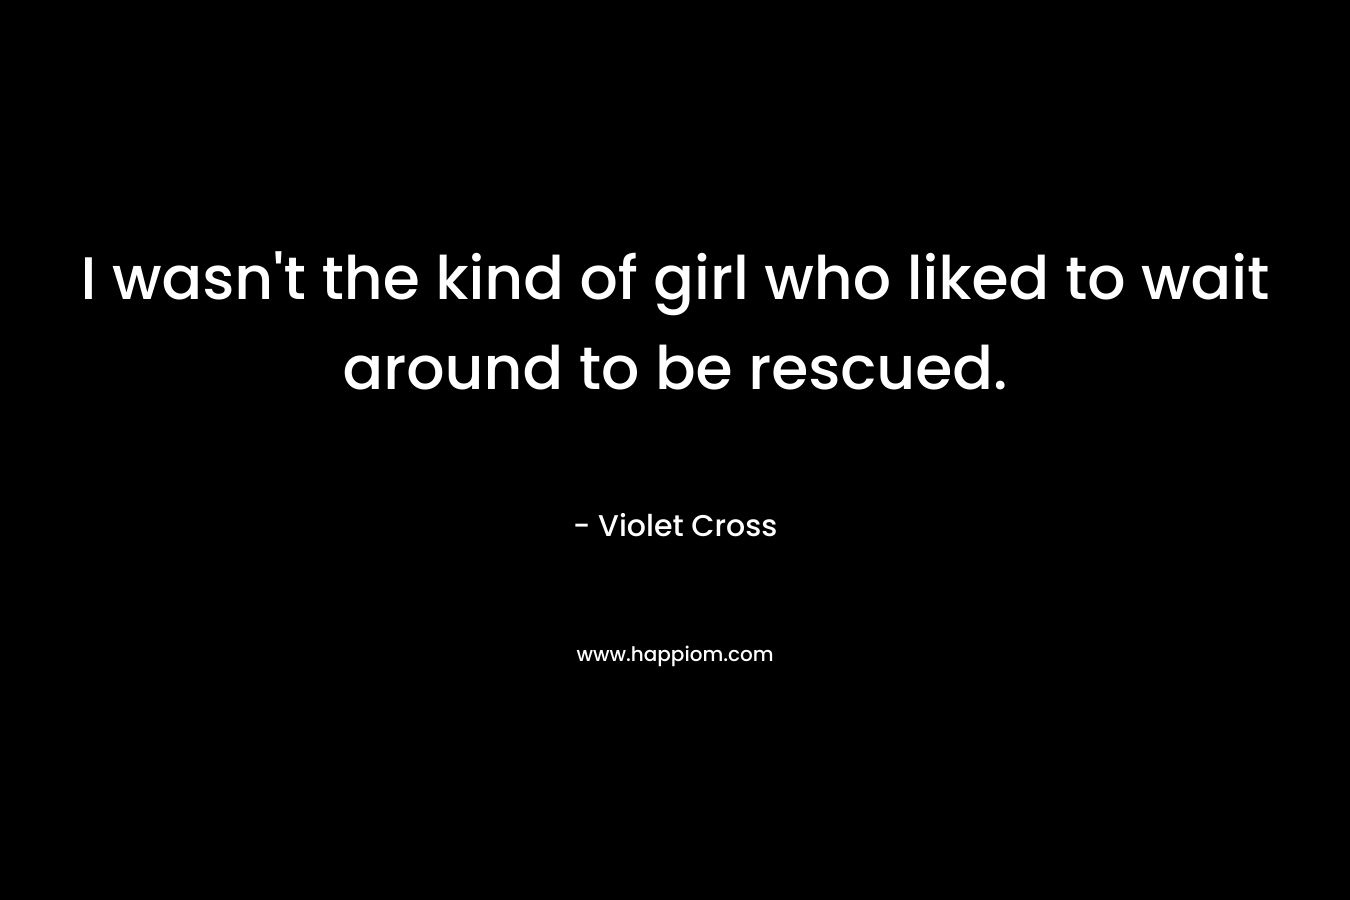 I wasn’t the kind of girl who liked to wait around to be rescued. – Violet Cross